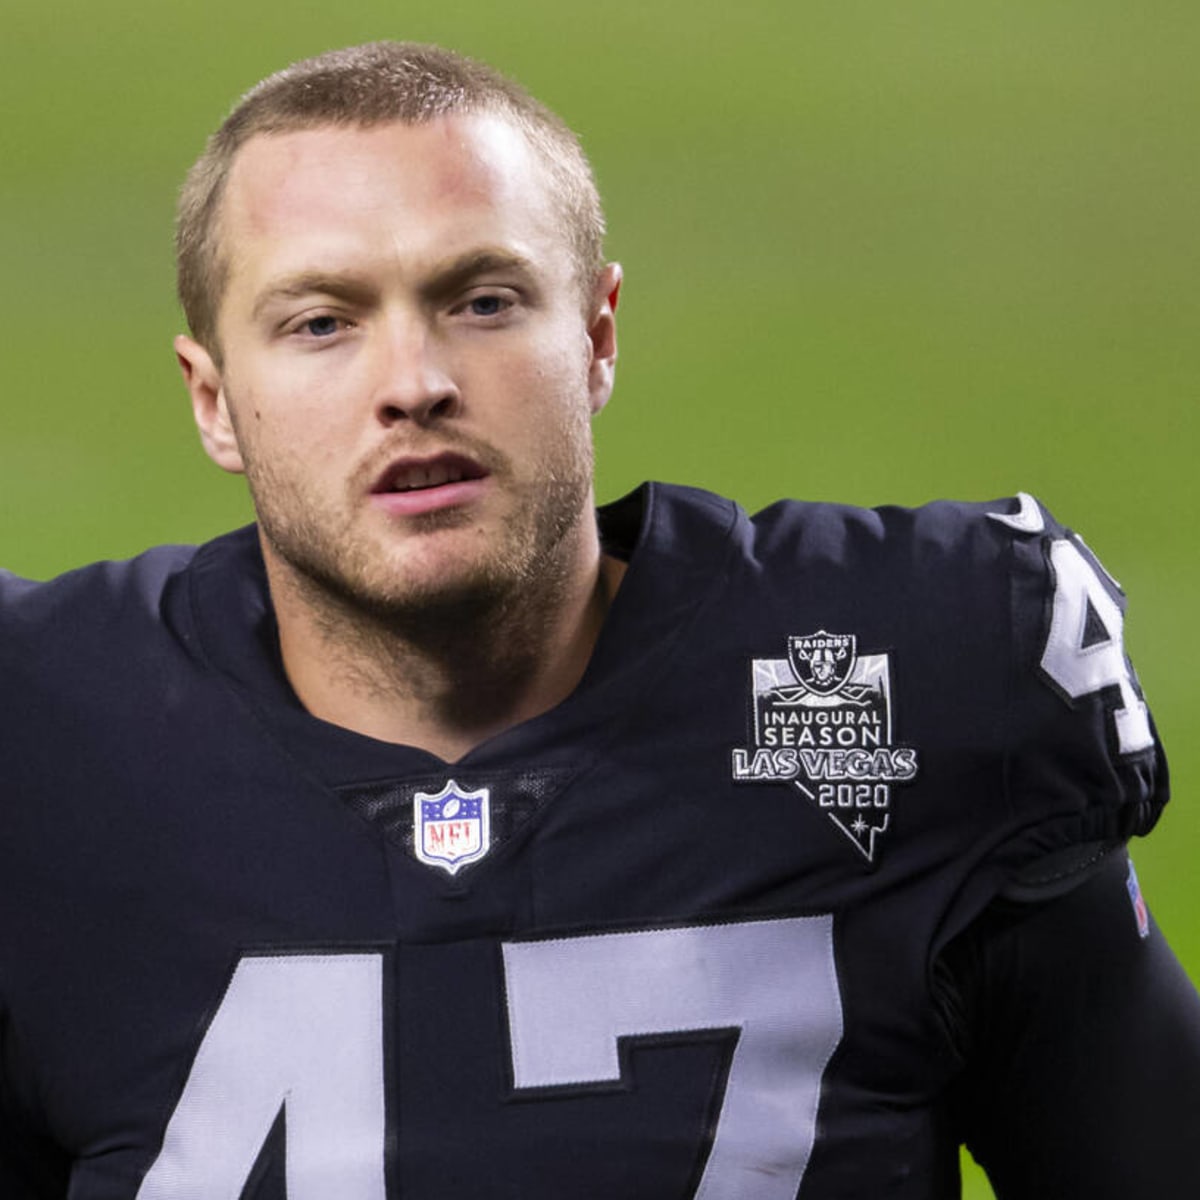 Raiders players reportedly 'angered' over stunning release of teammate